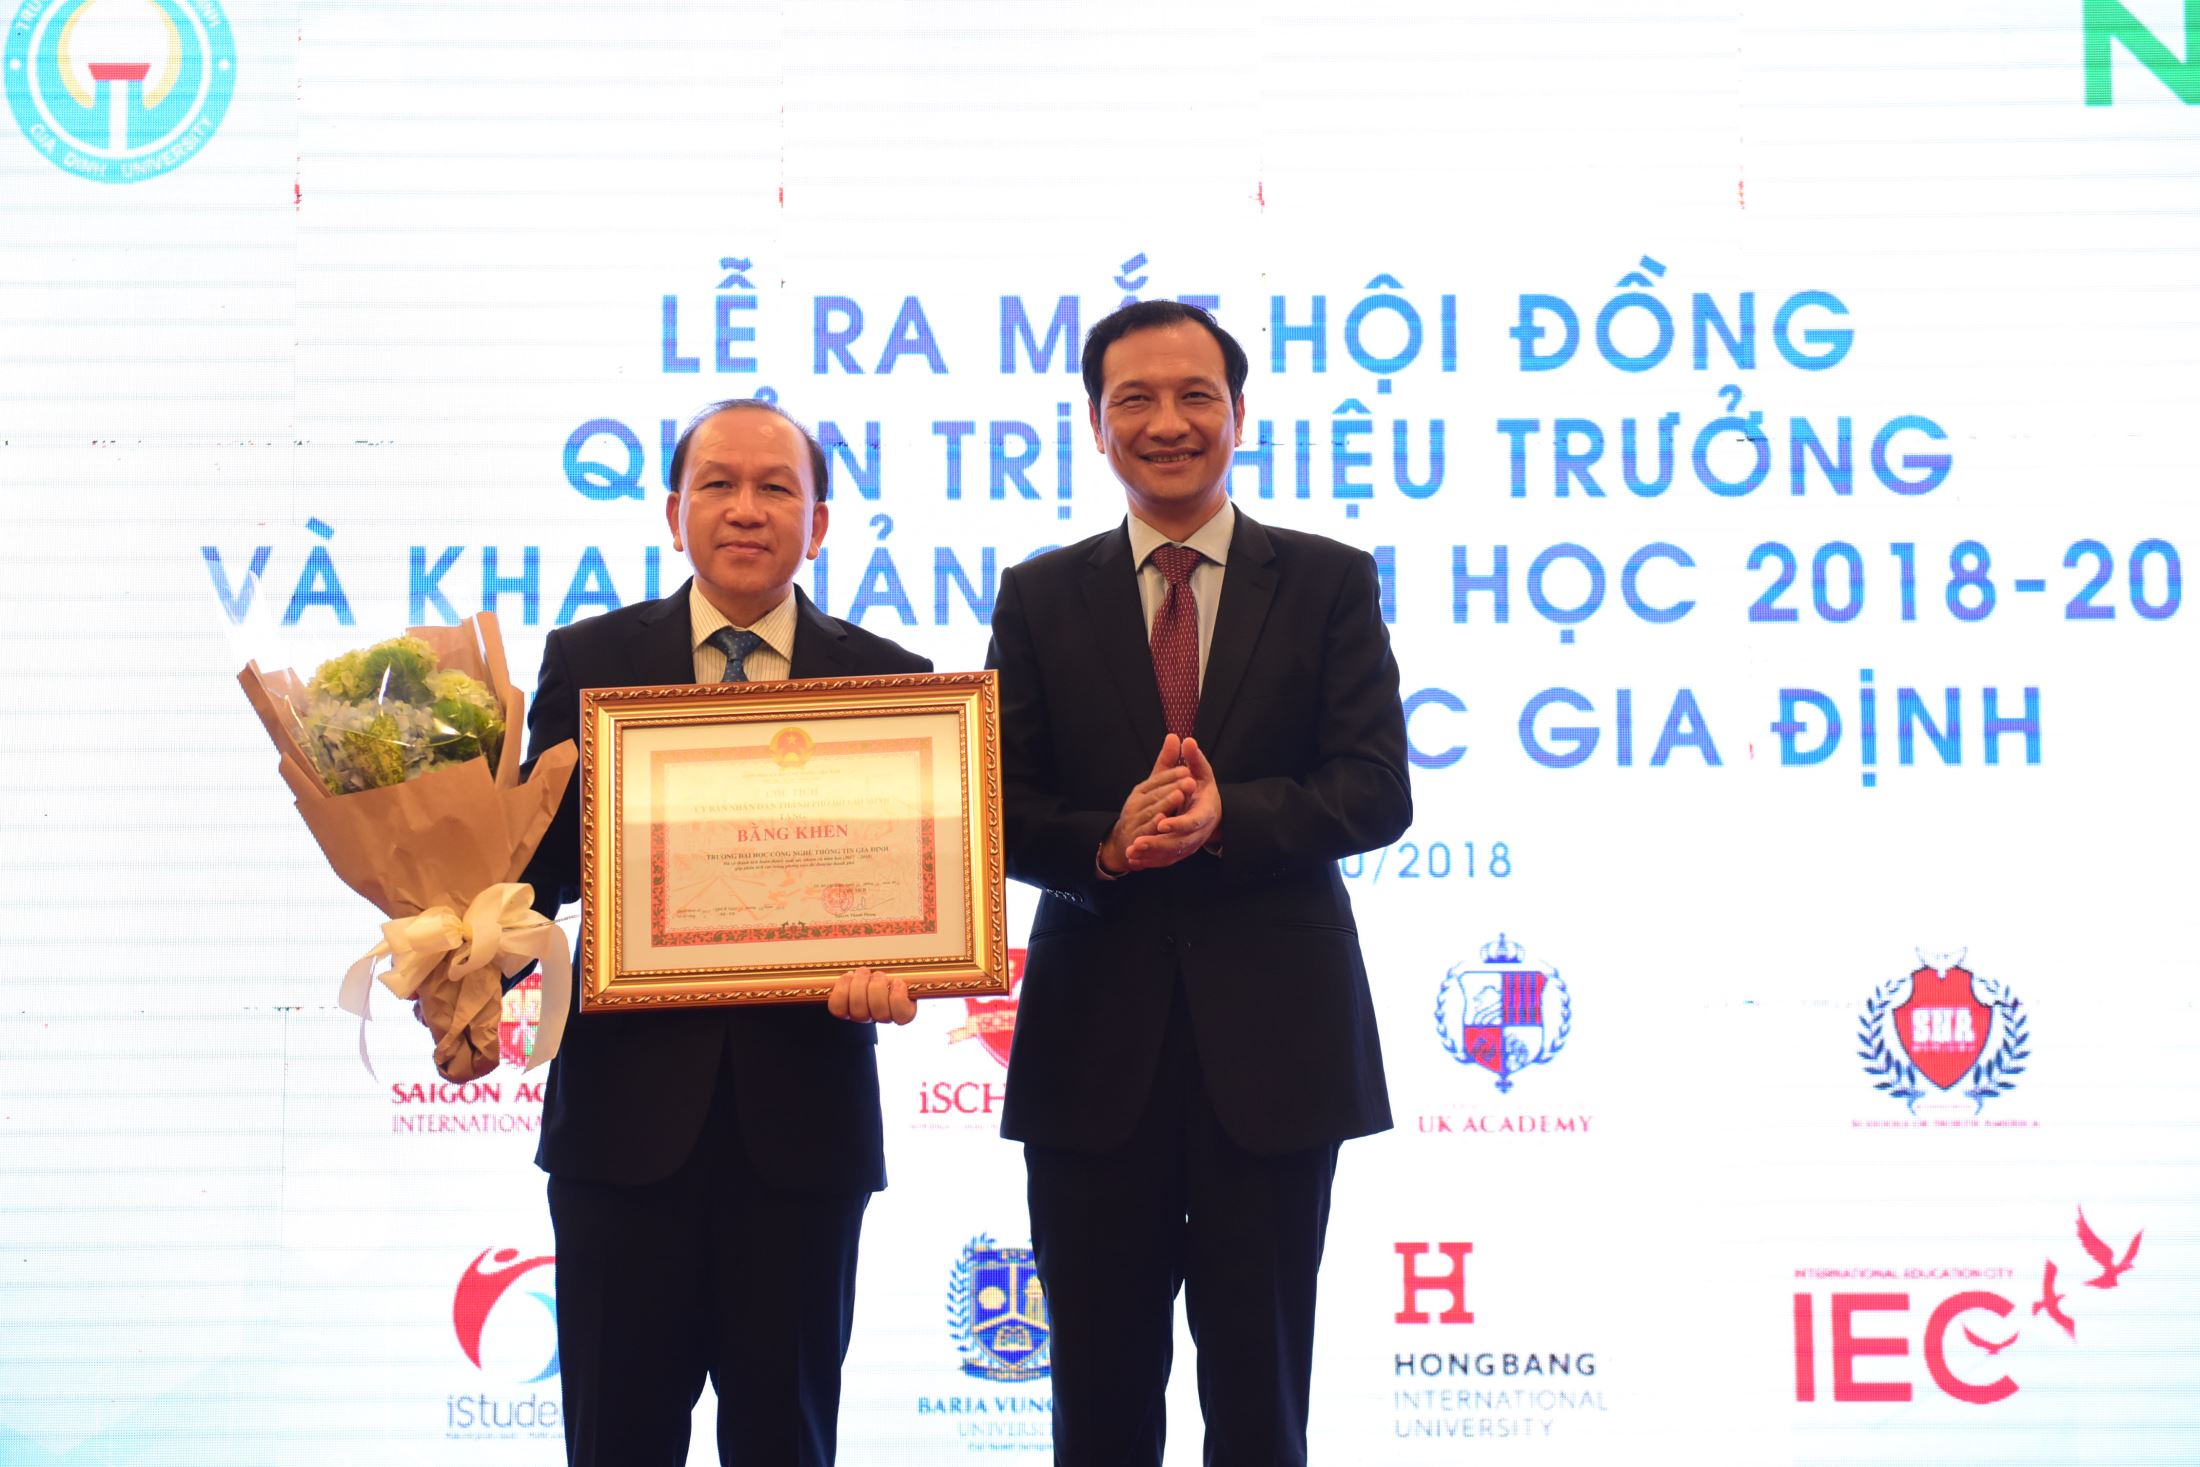 Dr. Ha Huu Phuc received Certificate of Merit of President of Ho Chi Minh City People's Committee on Gia Dinh University's achievements of excellences in the 2017-2018 academic year, contributing positively in the development of the city.